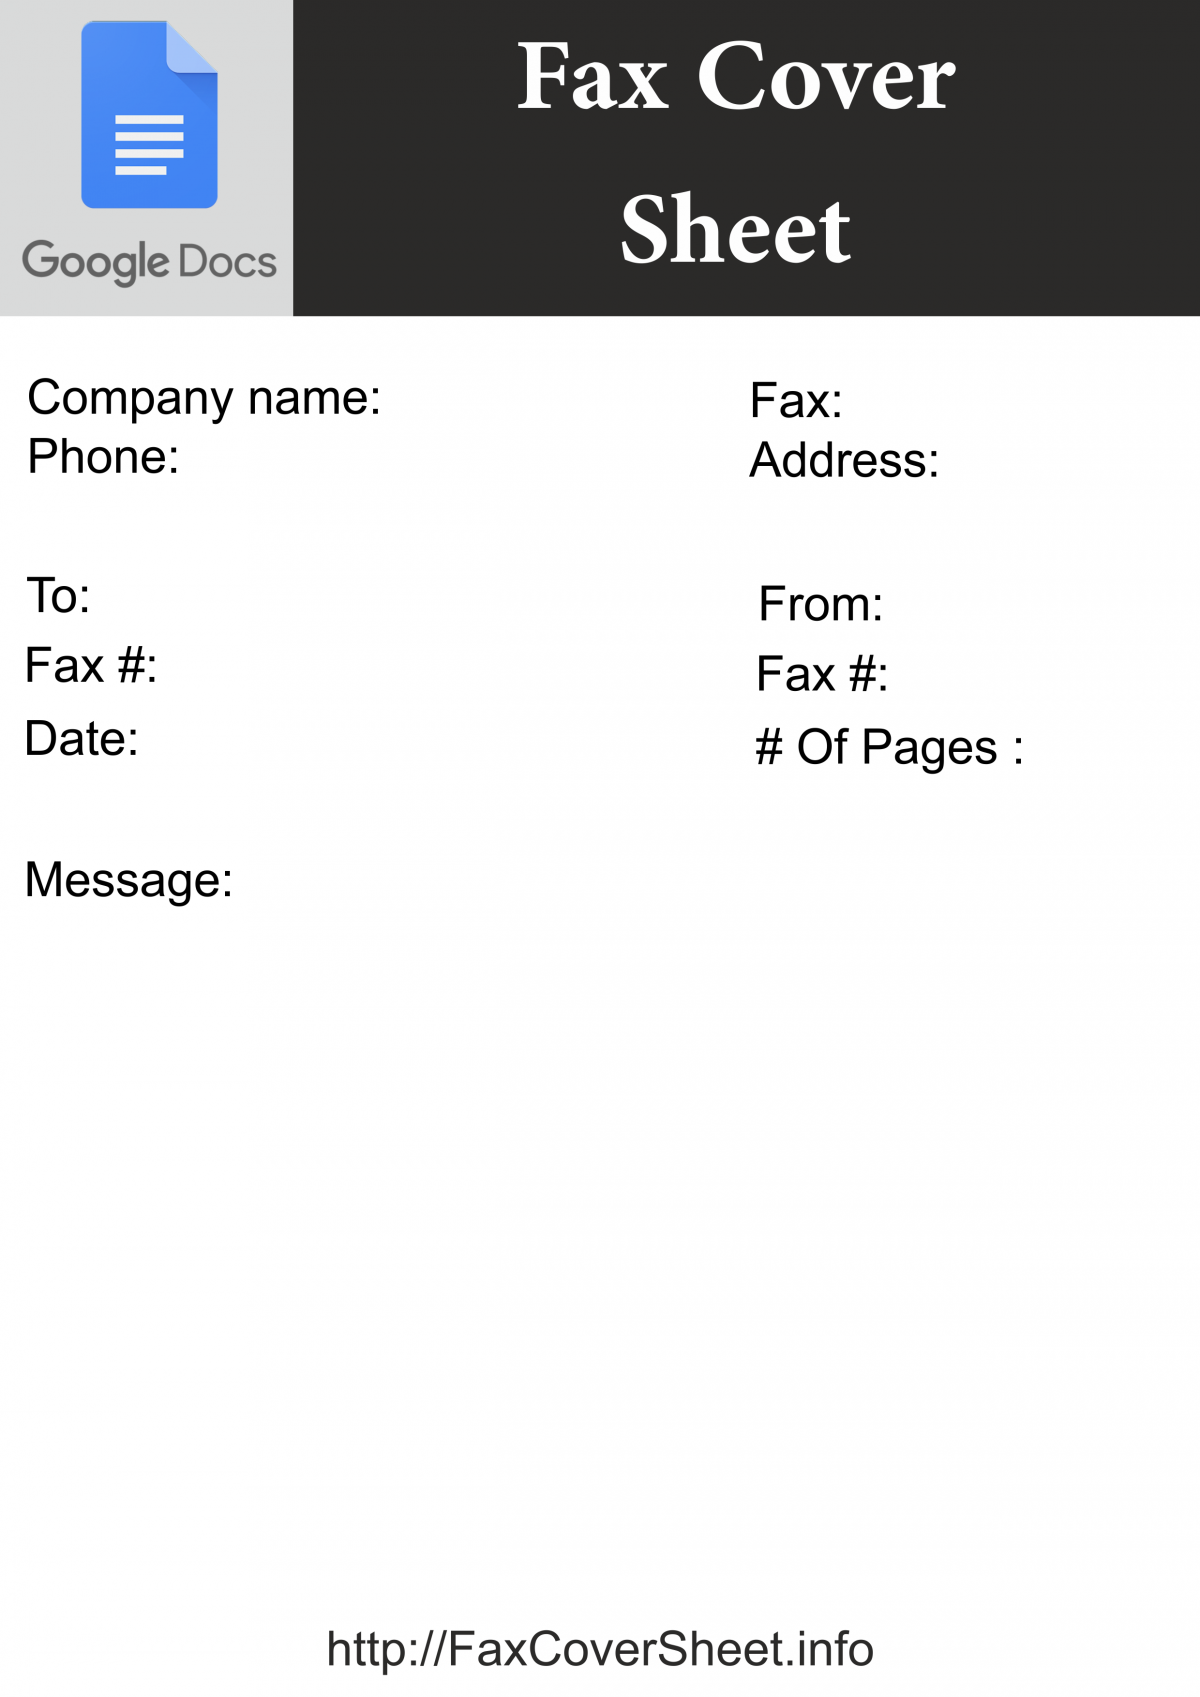 ready to use google docs fax cover sheet